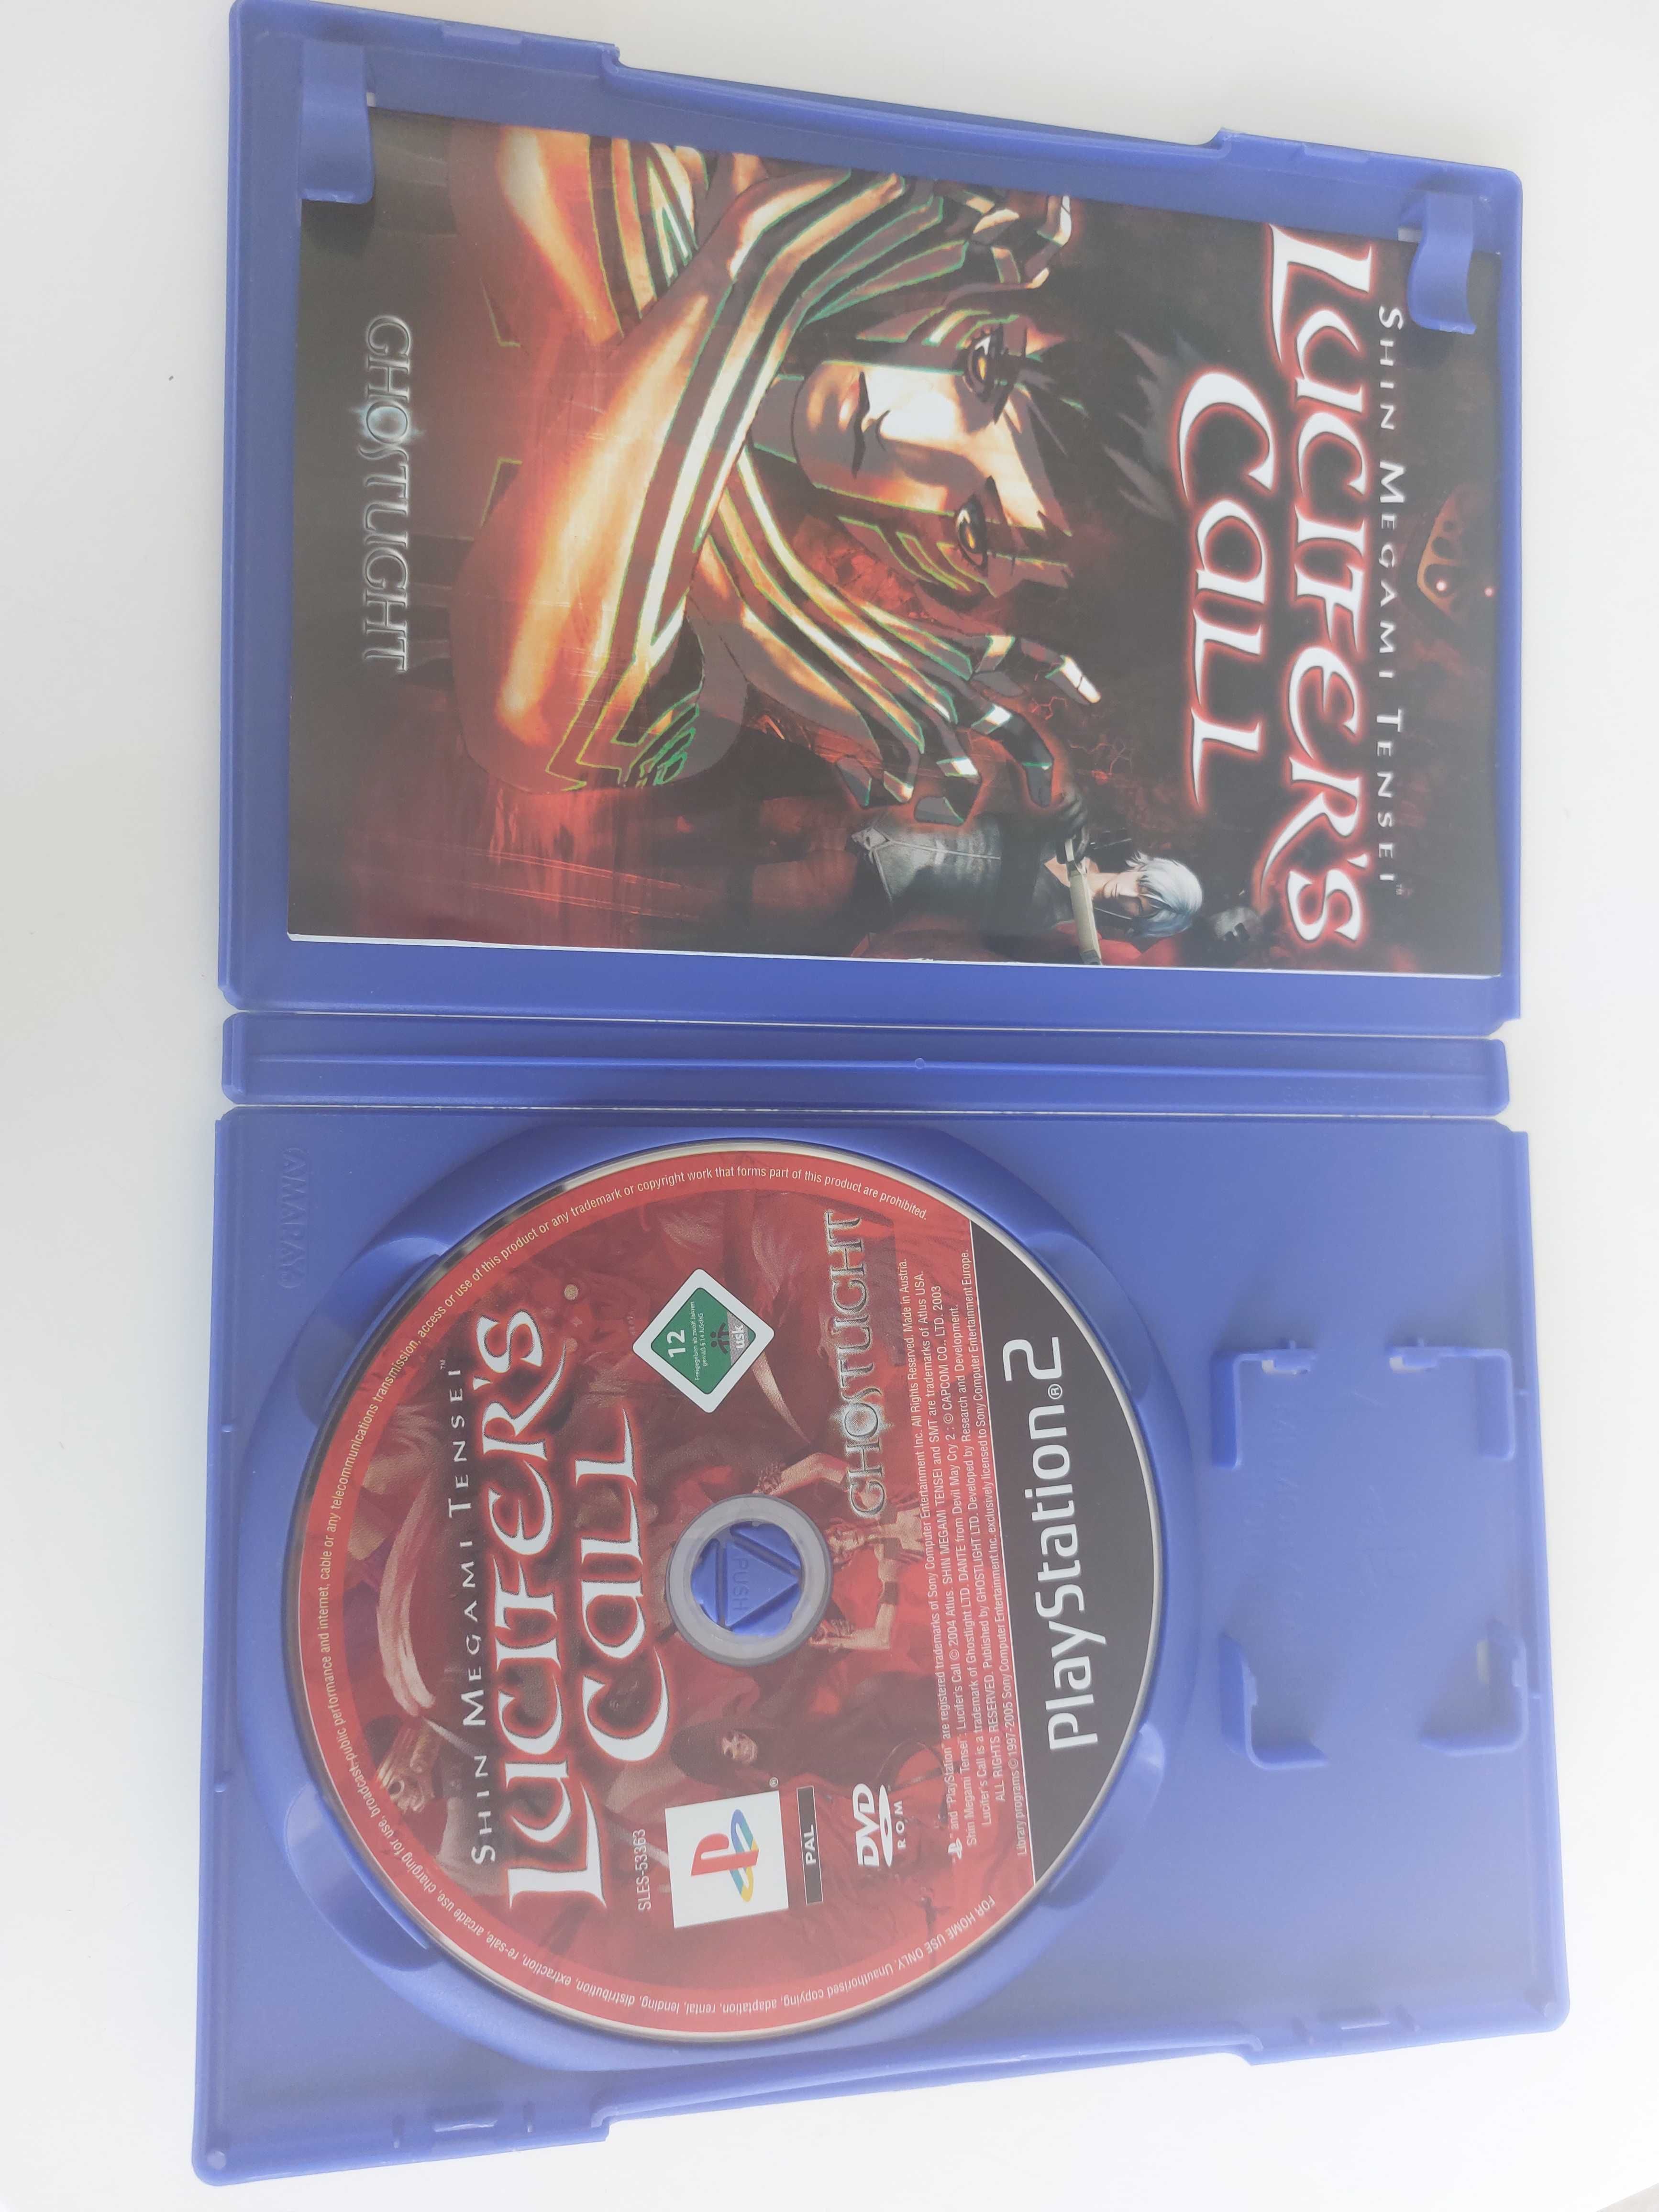 Lucifer's Call Playstation 2 PS2